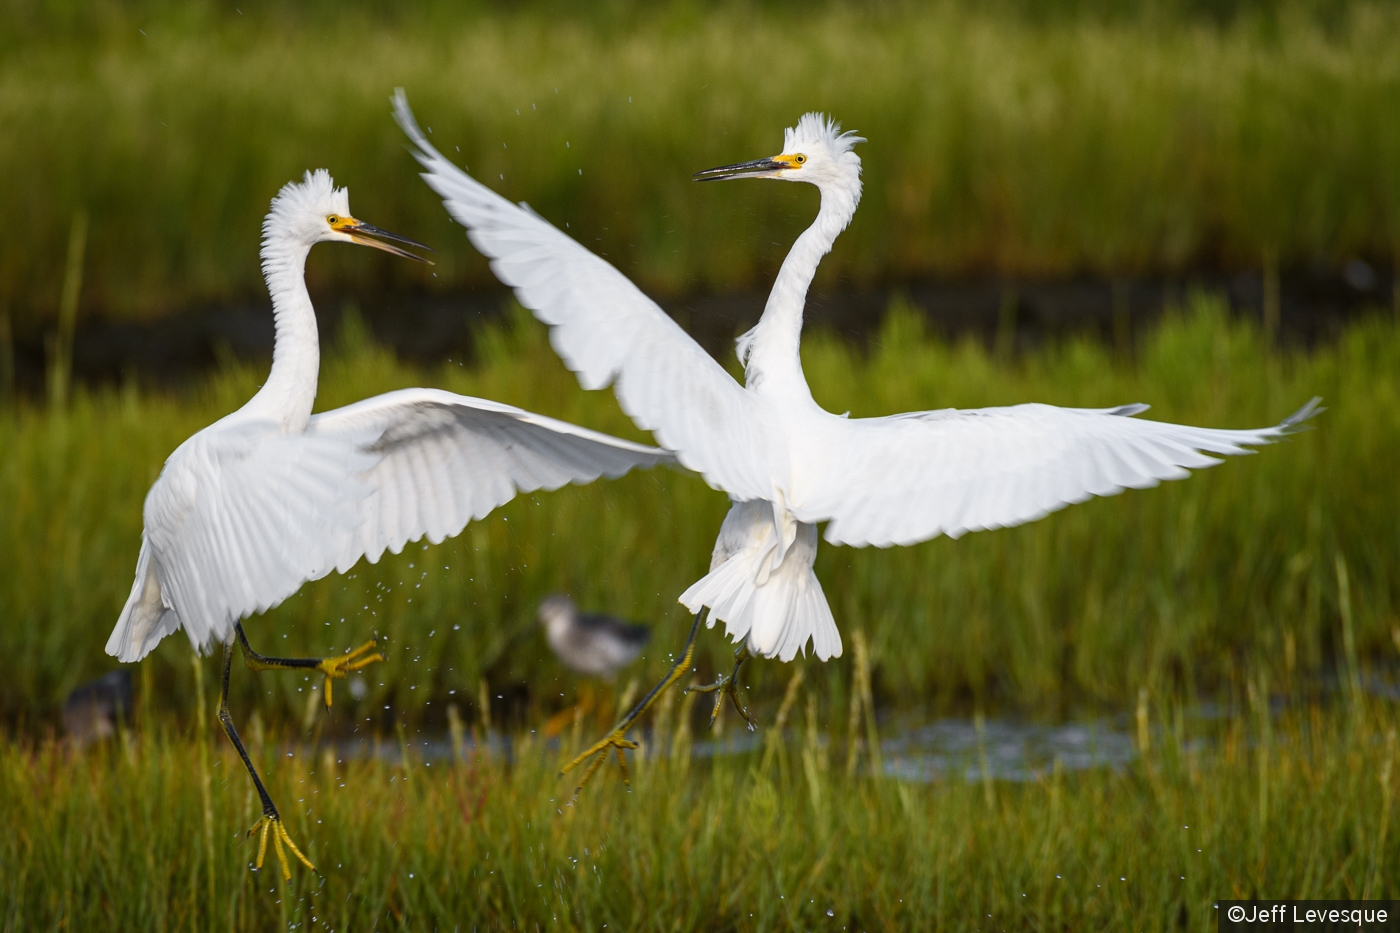 Young Egrets at Play by Jeff Levesque